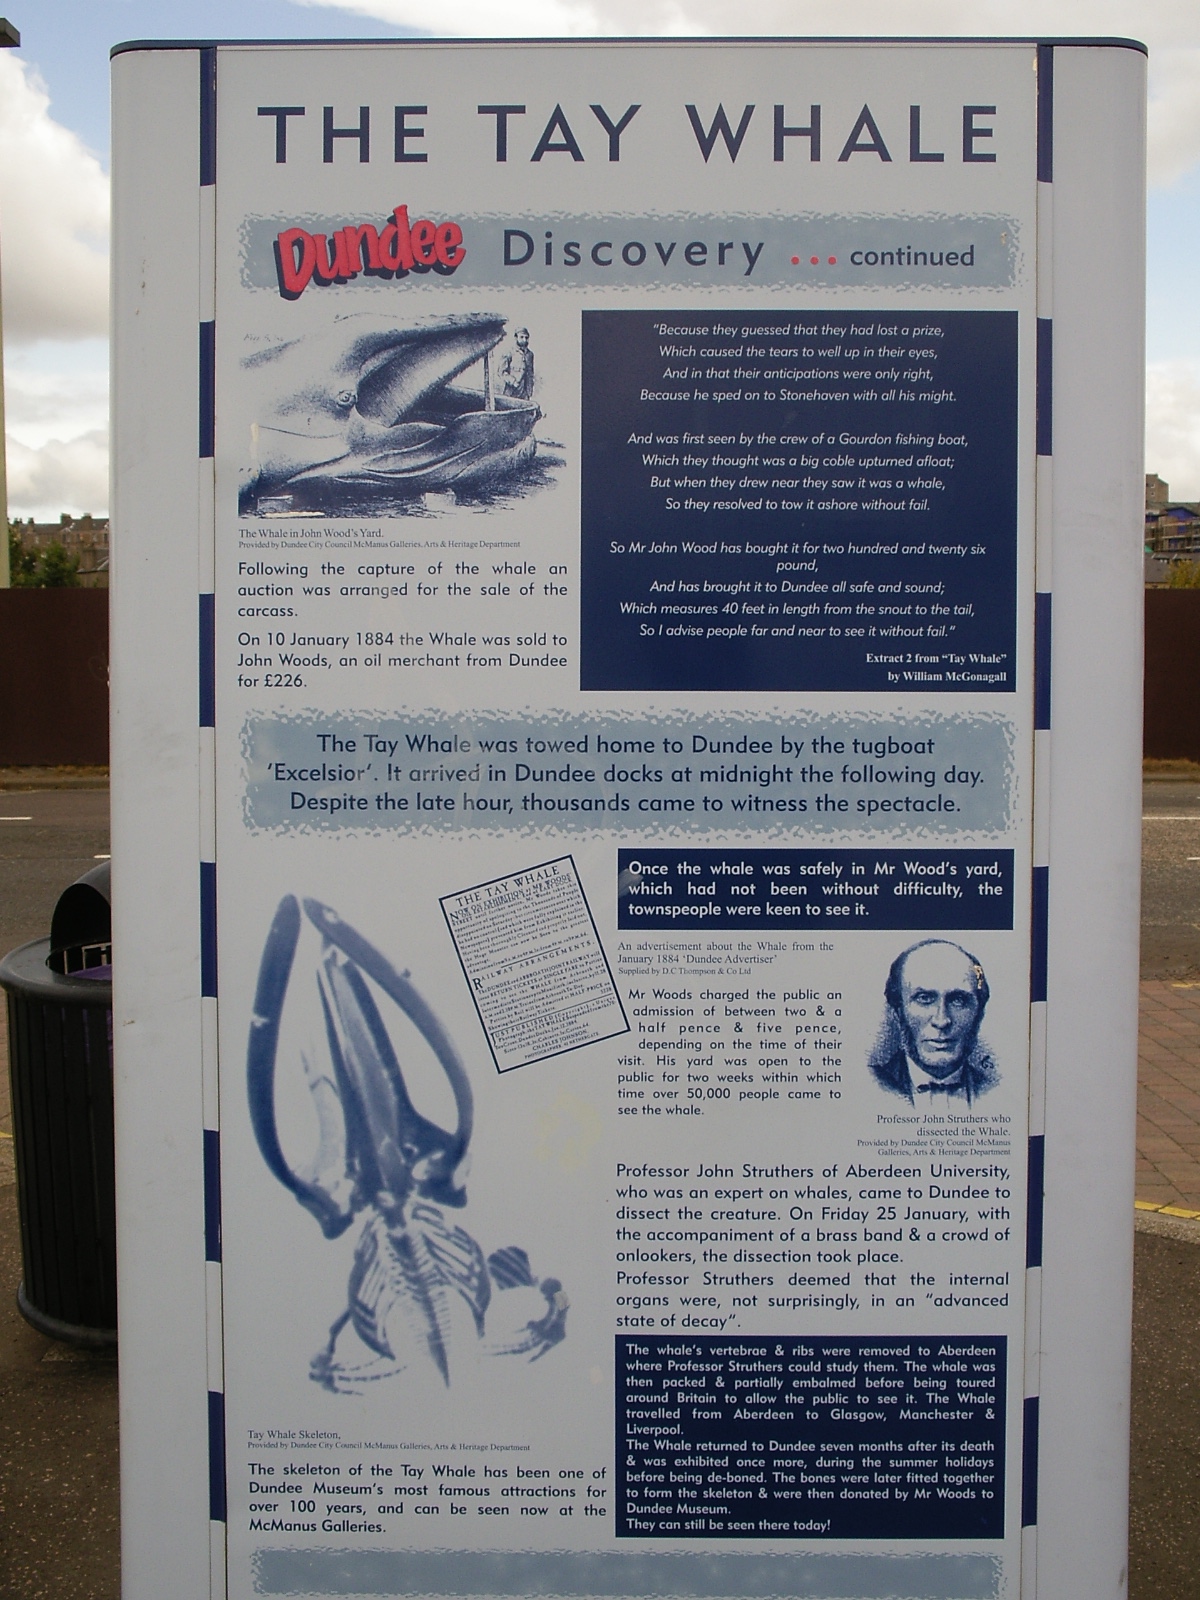 History of Dundee - the Tay Whale